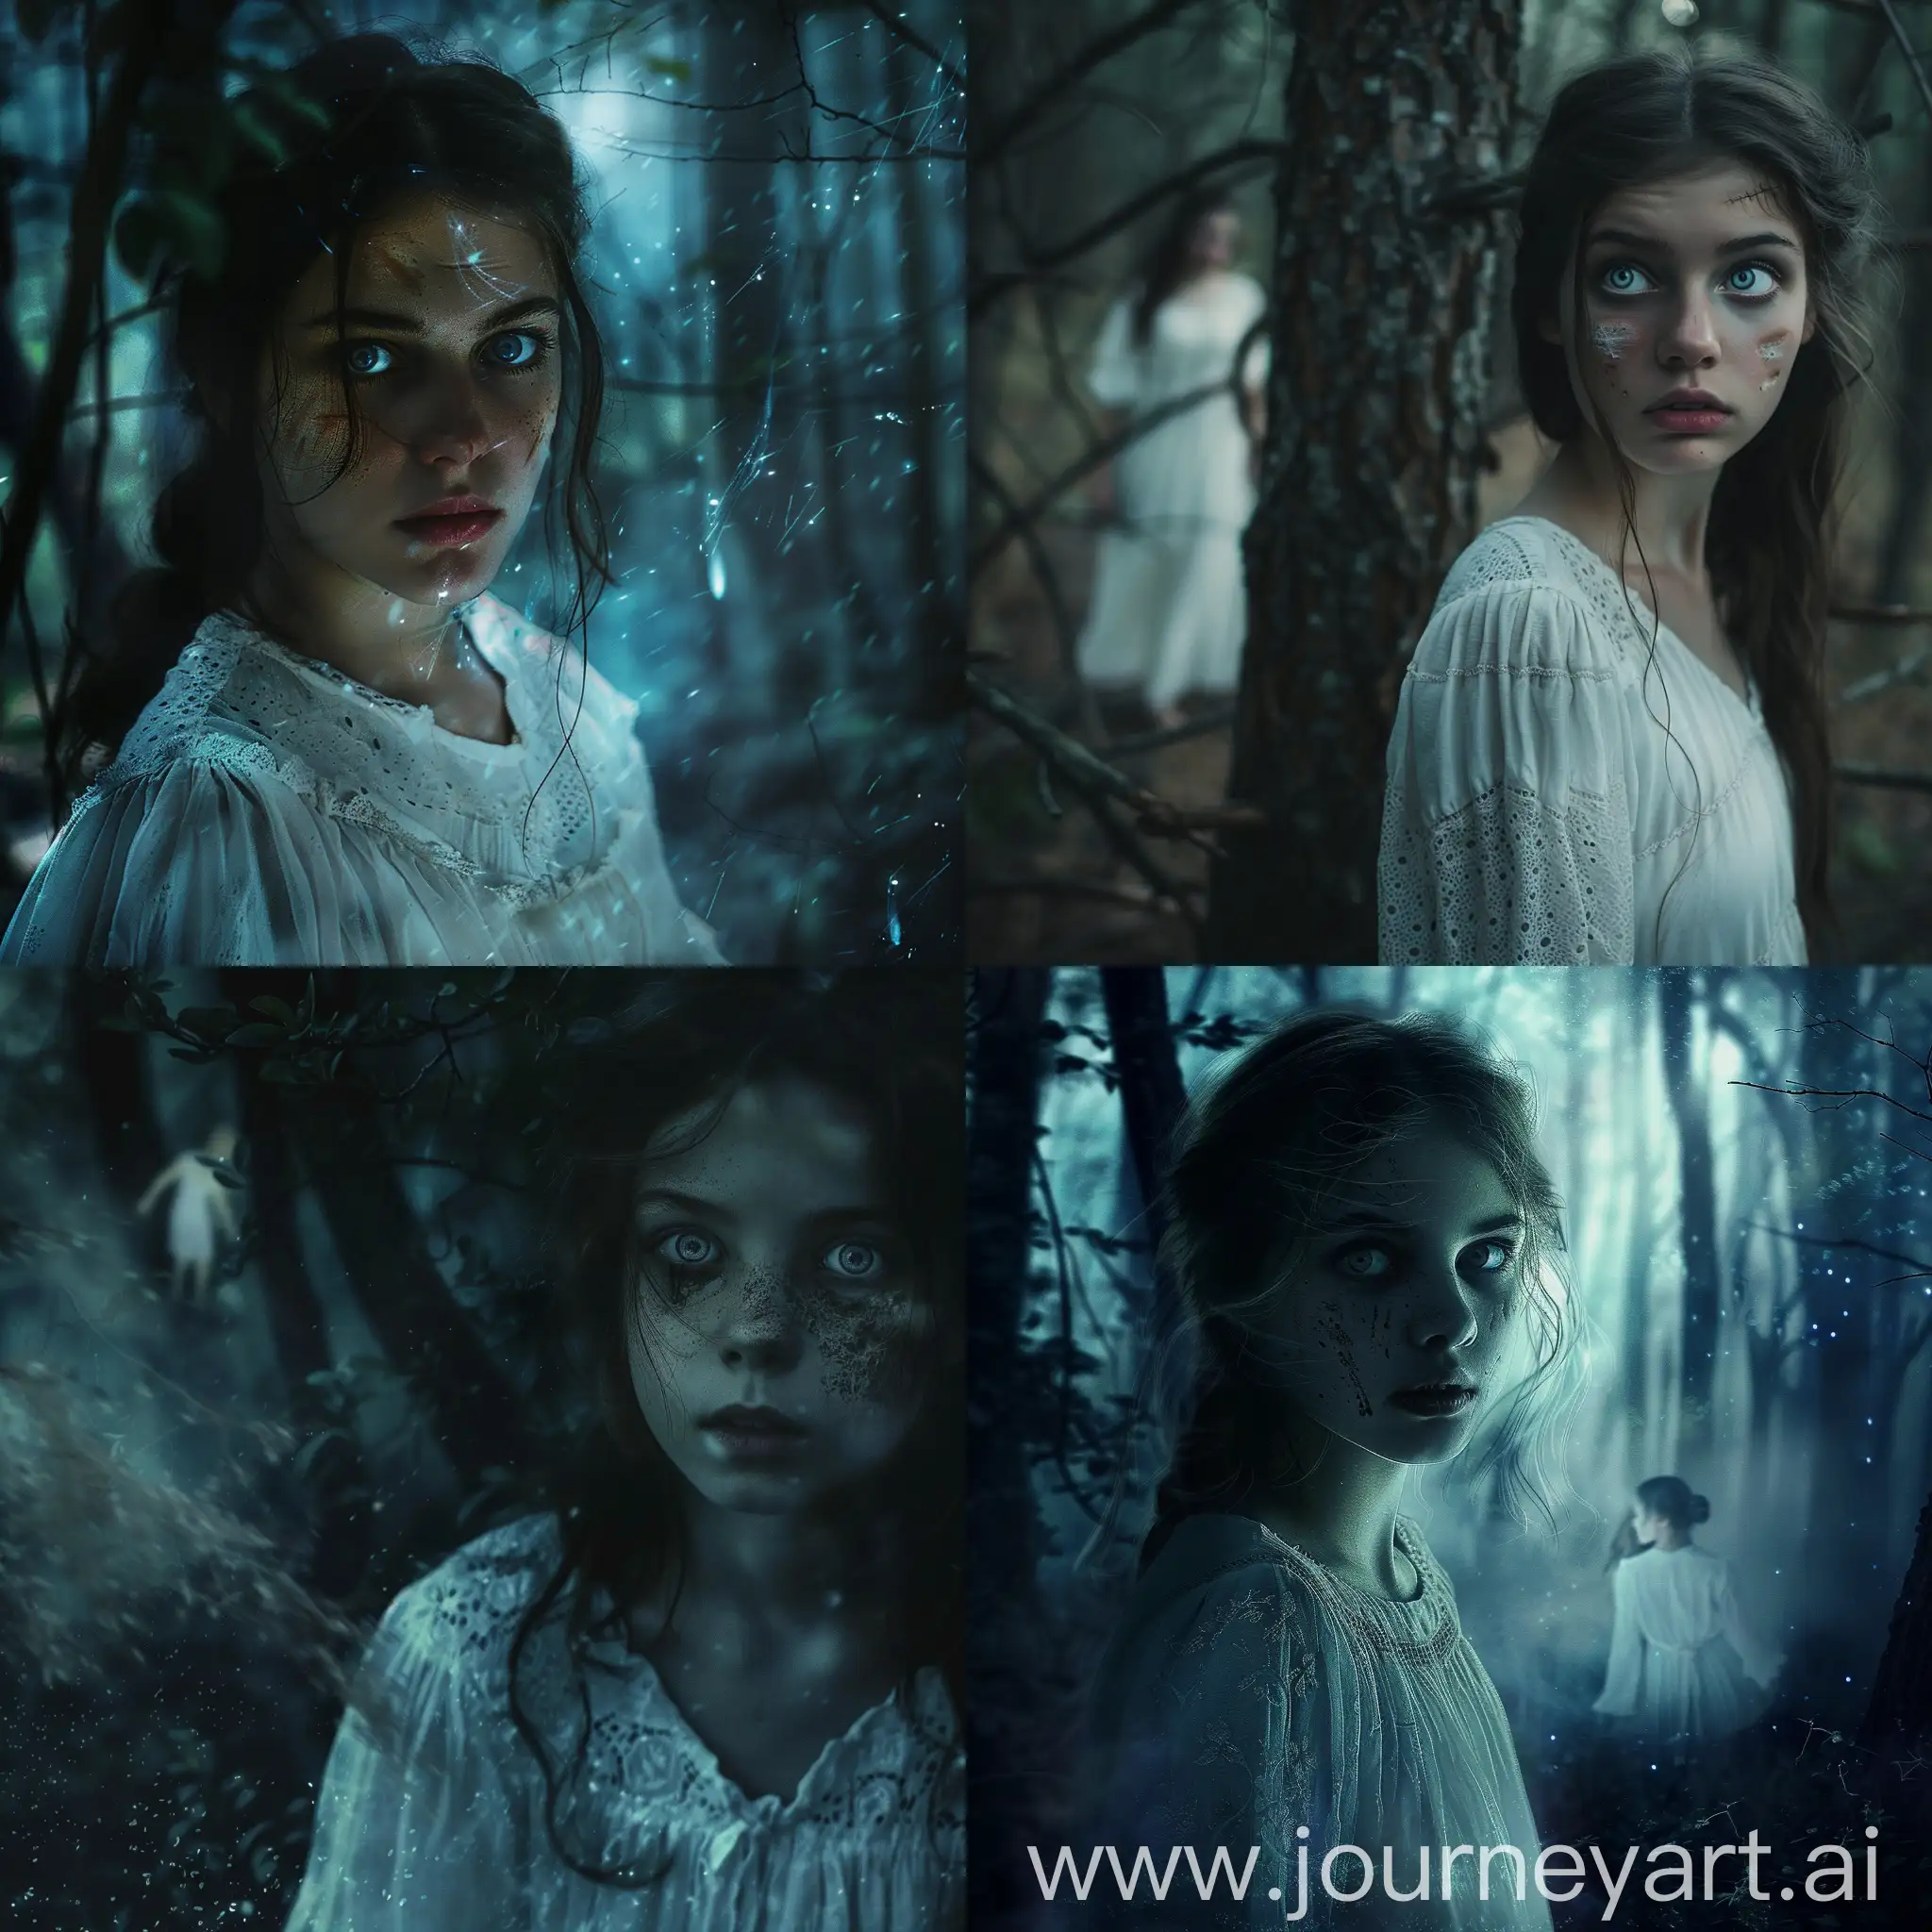 Lost-Girl-in-Mystical-Forest-White-Nightgown-and-Blue-Eyes